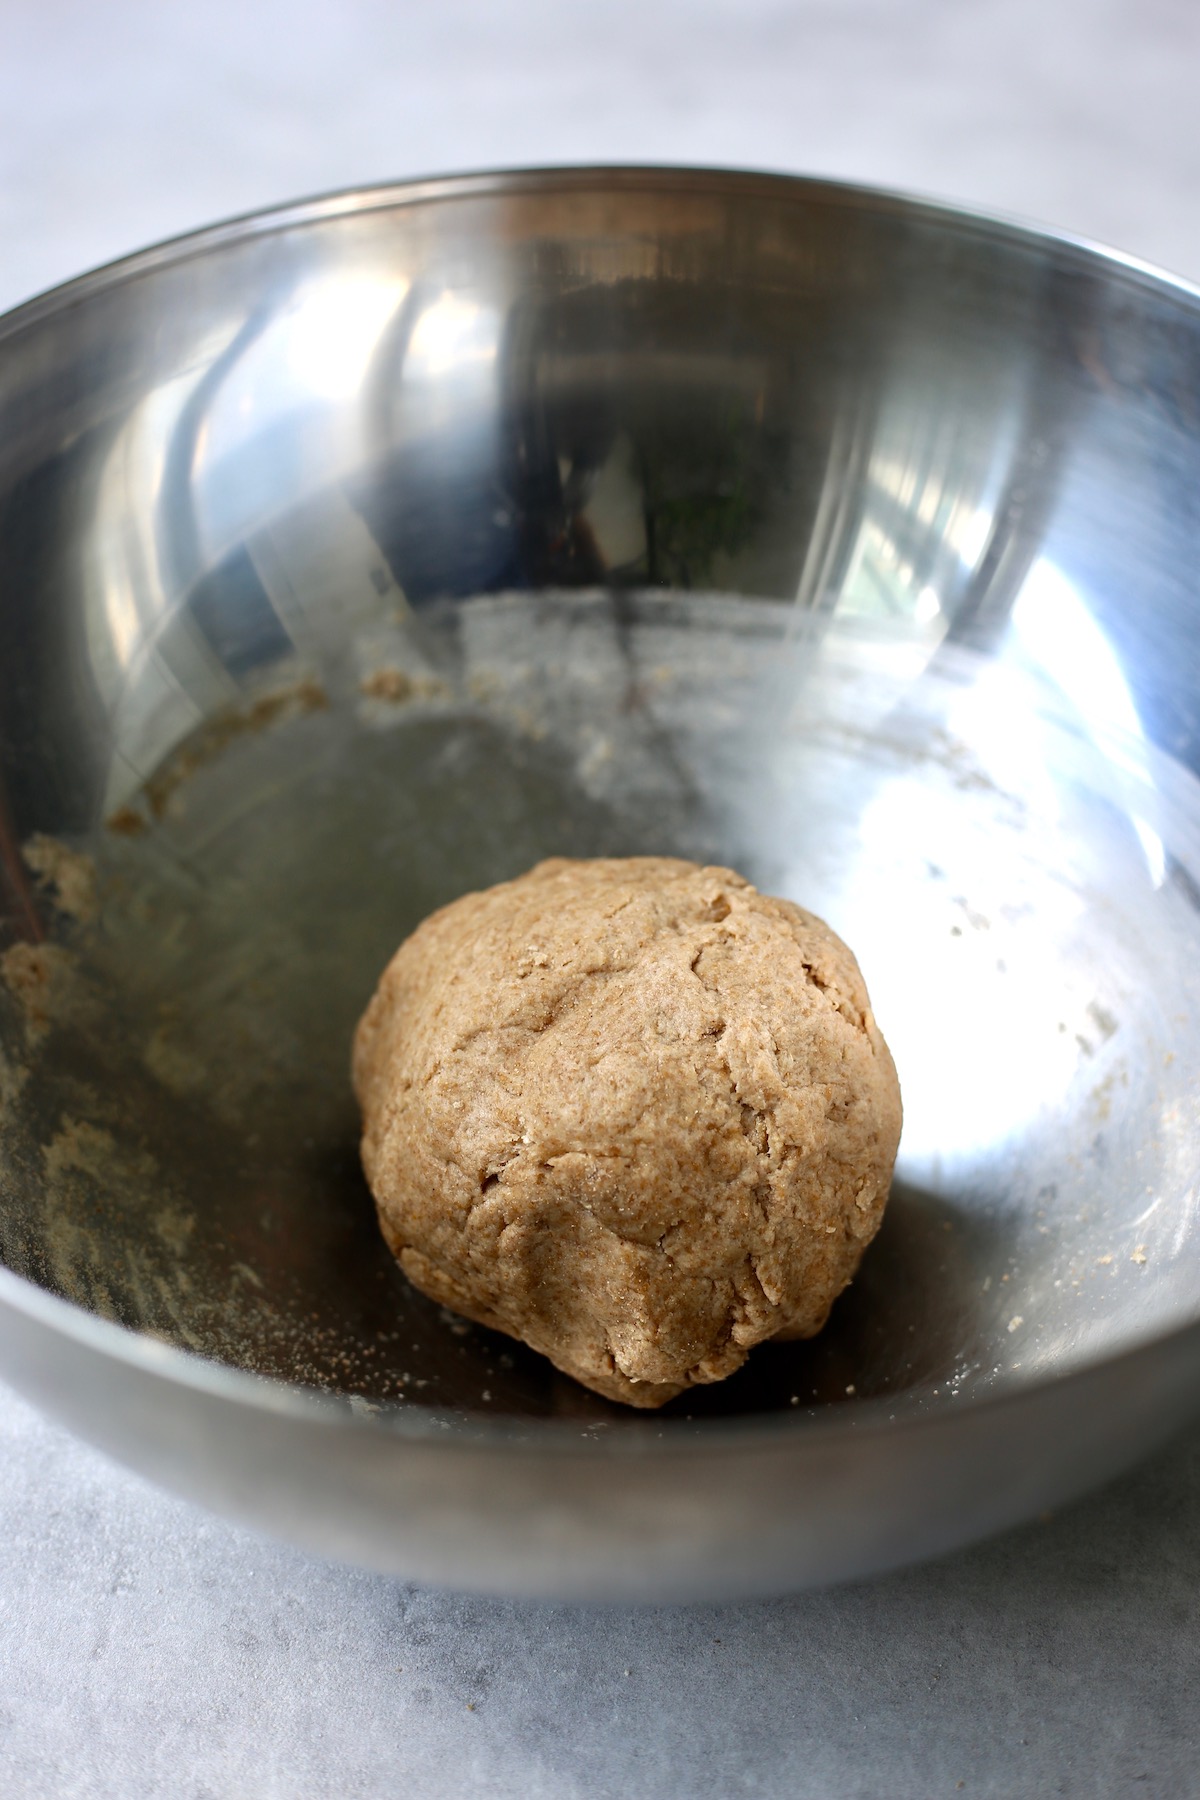 A ball of whole wheat pizza dough resting in a large silver mixing bowl.